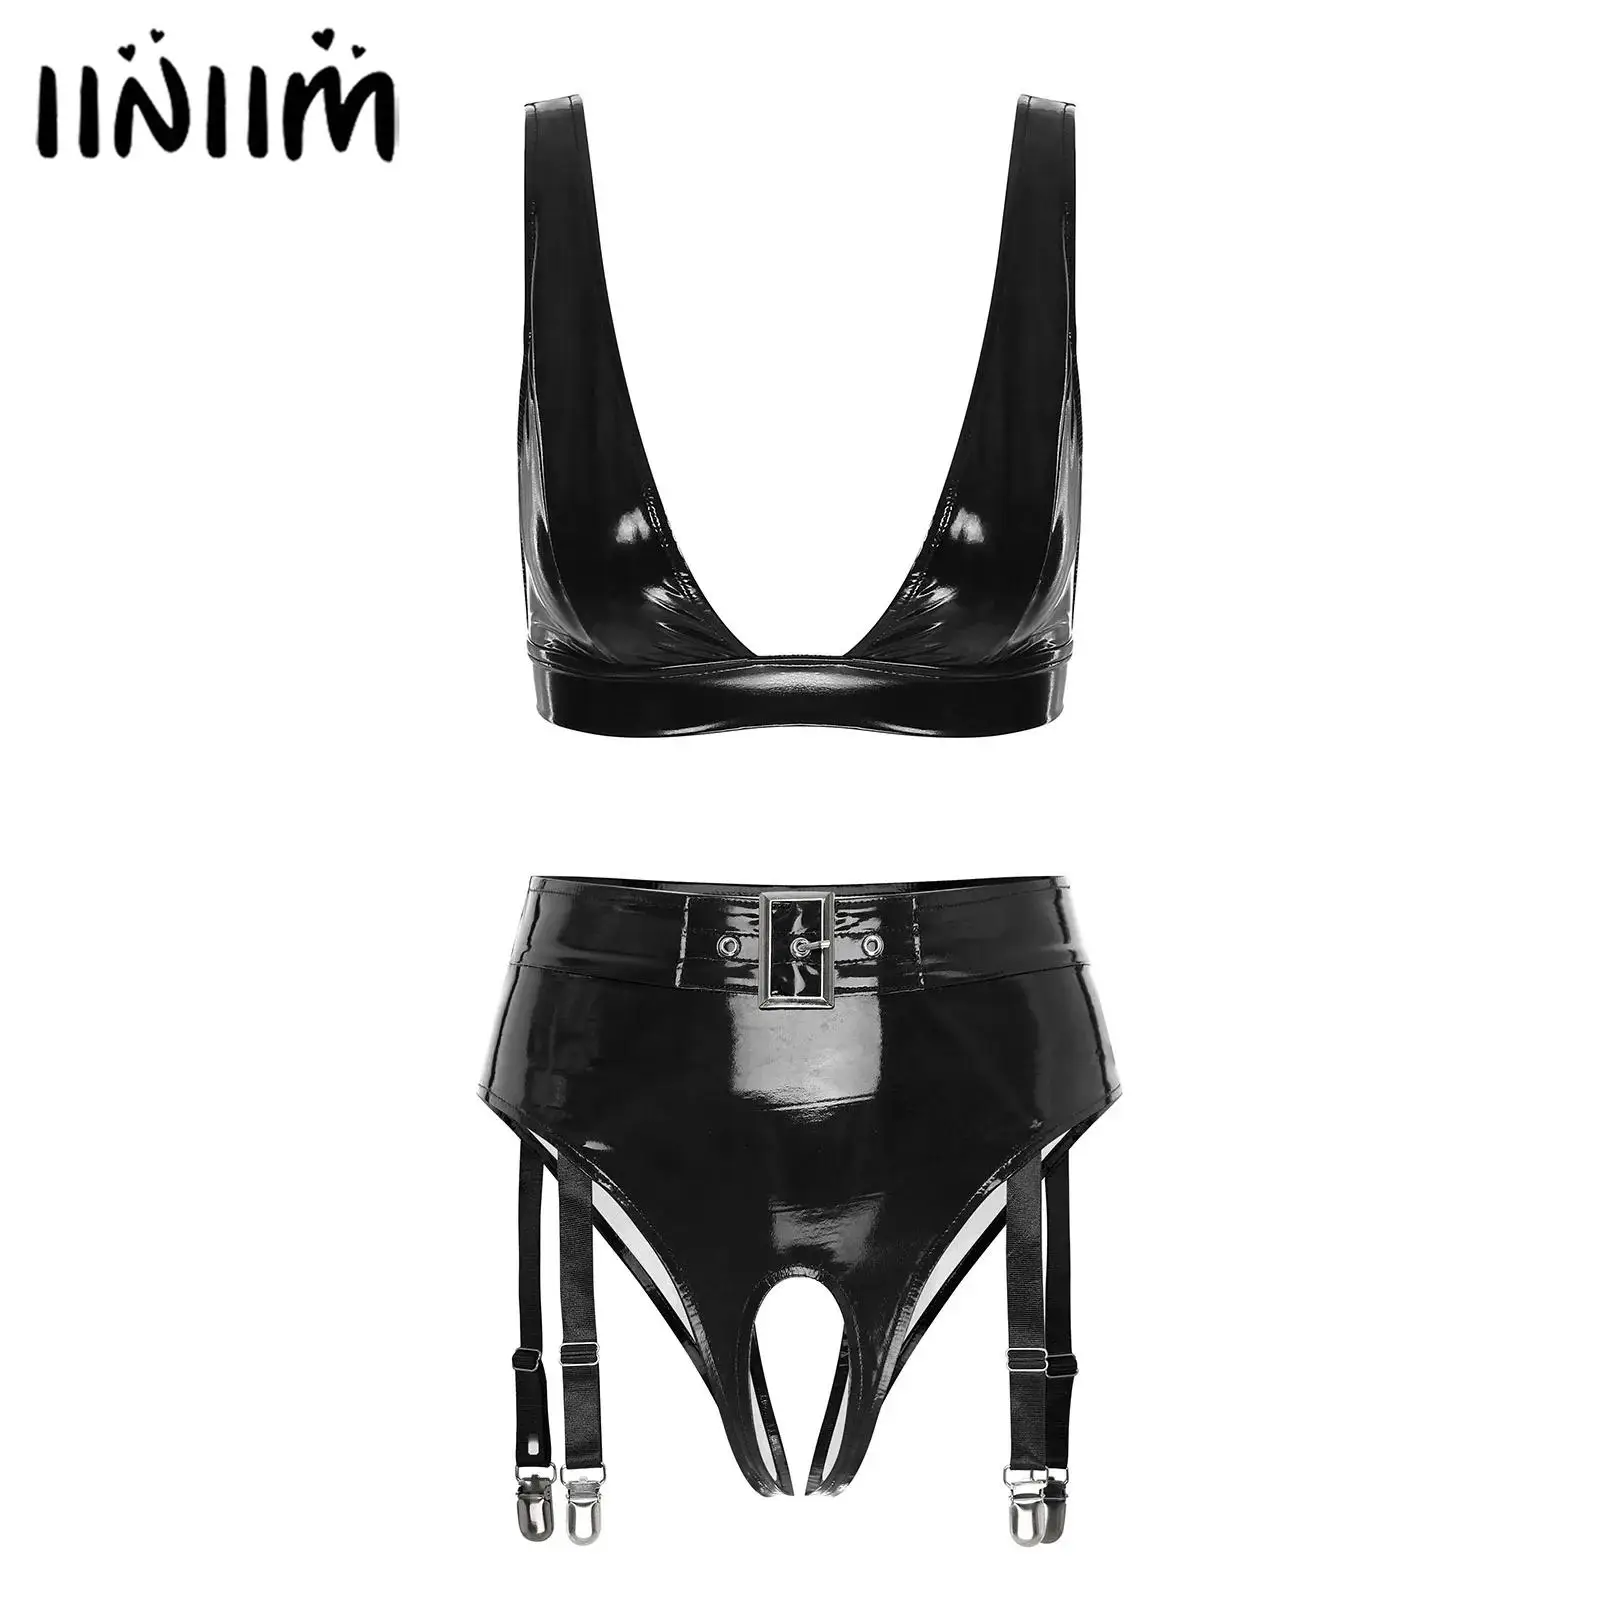 

Womens Wet Look Patent Leather Crotchless Lingerie Set Wide Shoulder Straps Bra Top with High Waist Open Crotch Garter Underwear